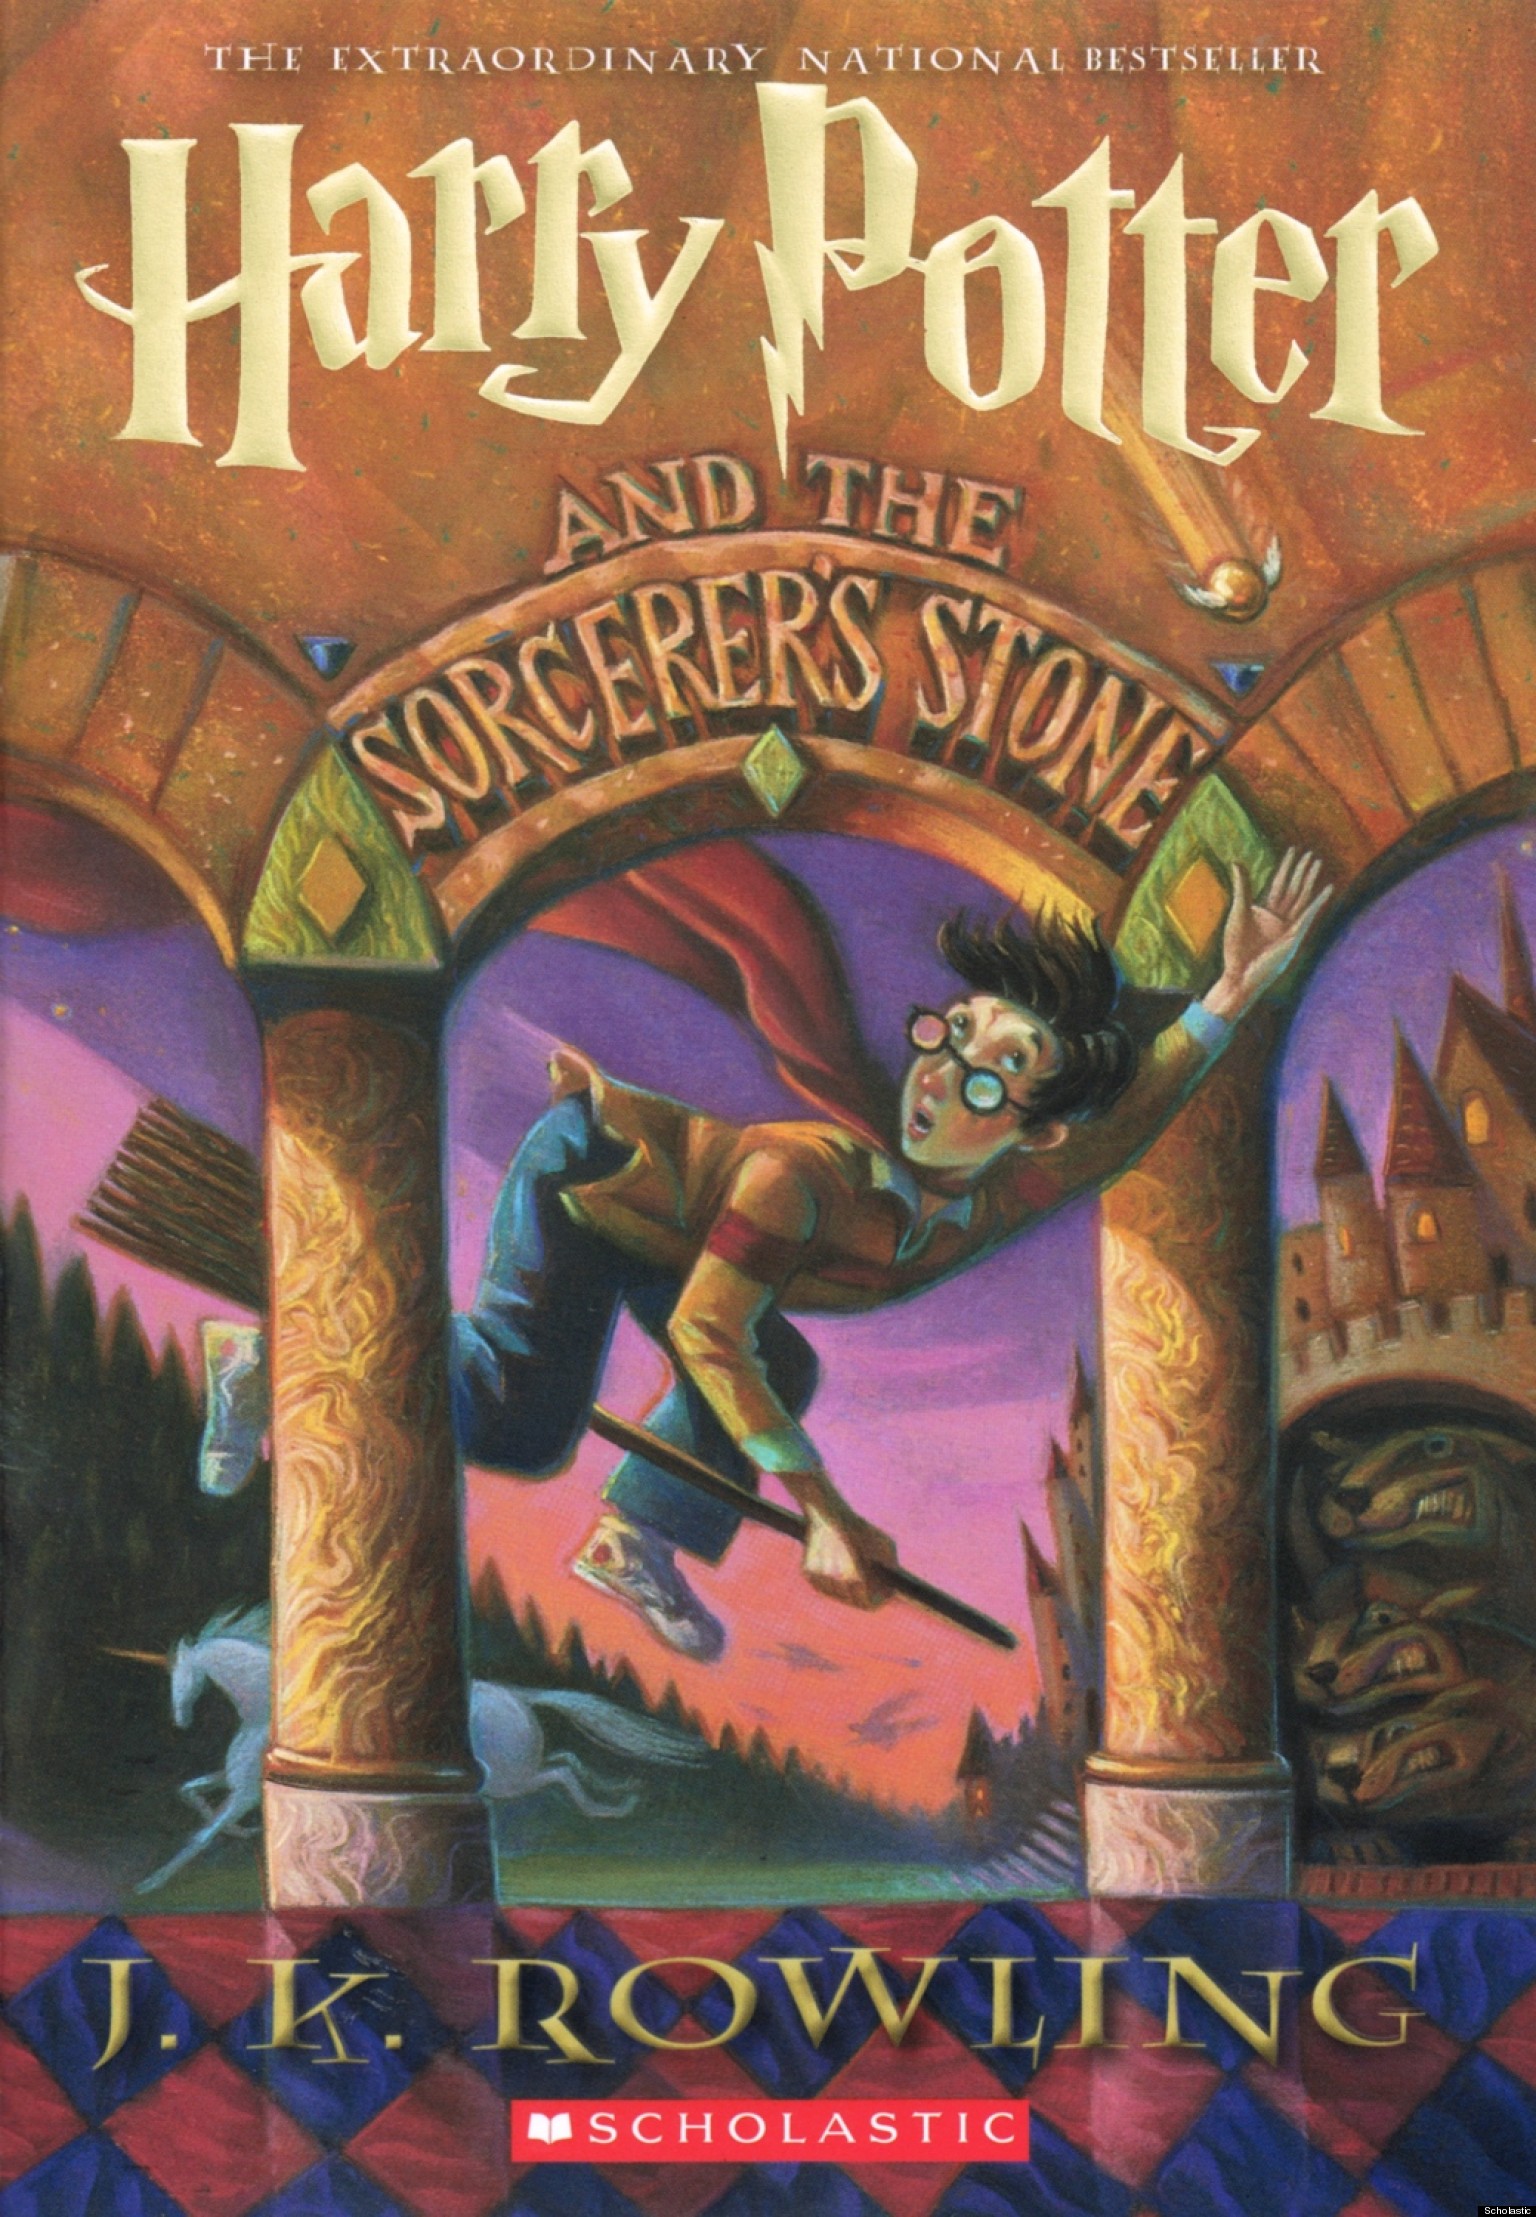 Scholastic Reveals New Book Cover For 'Harry Potter And The Sorcerer's